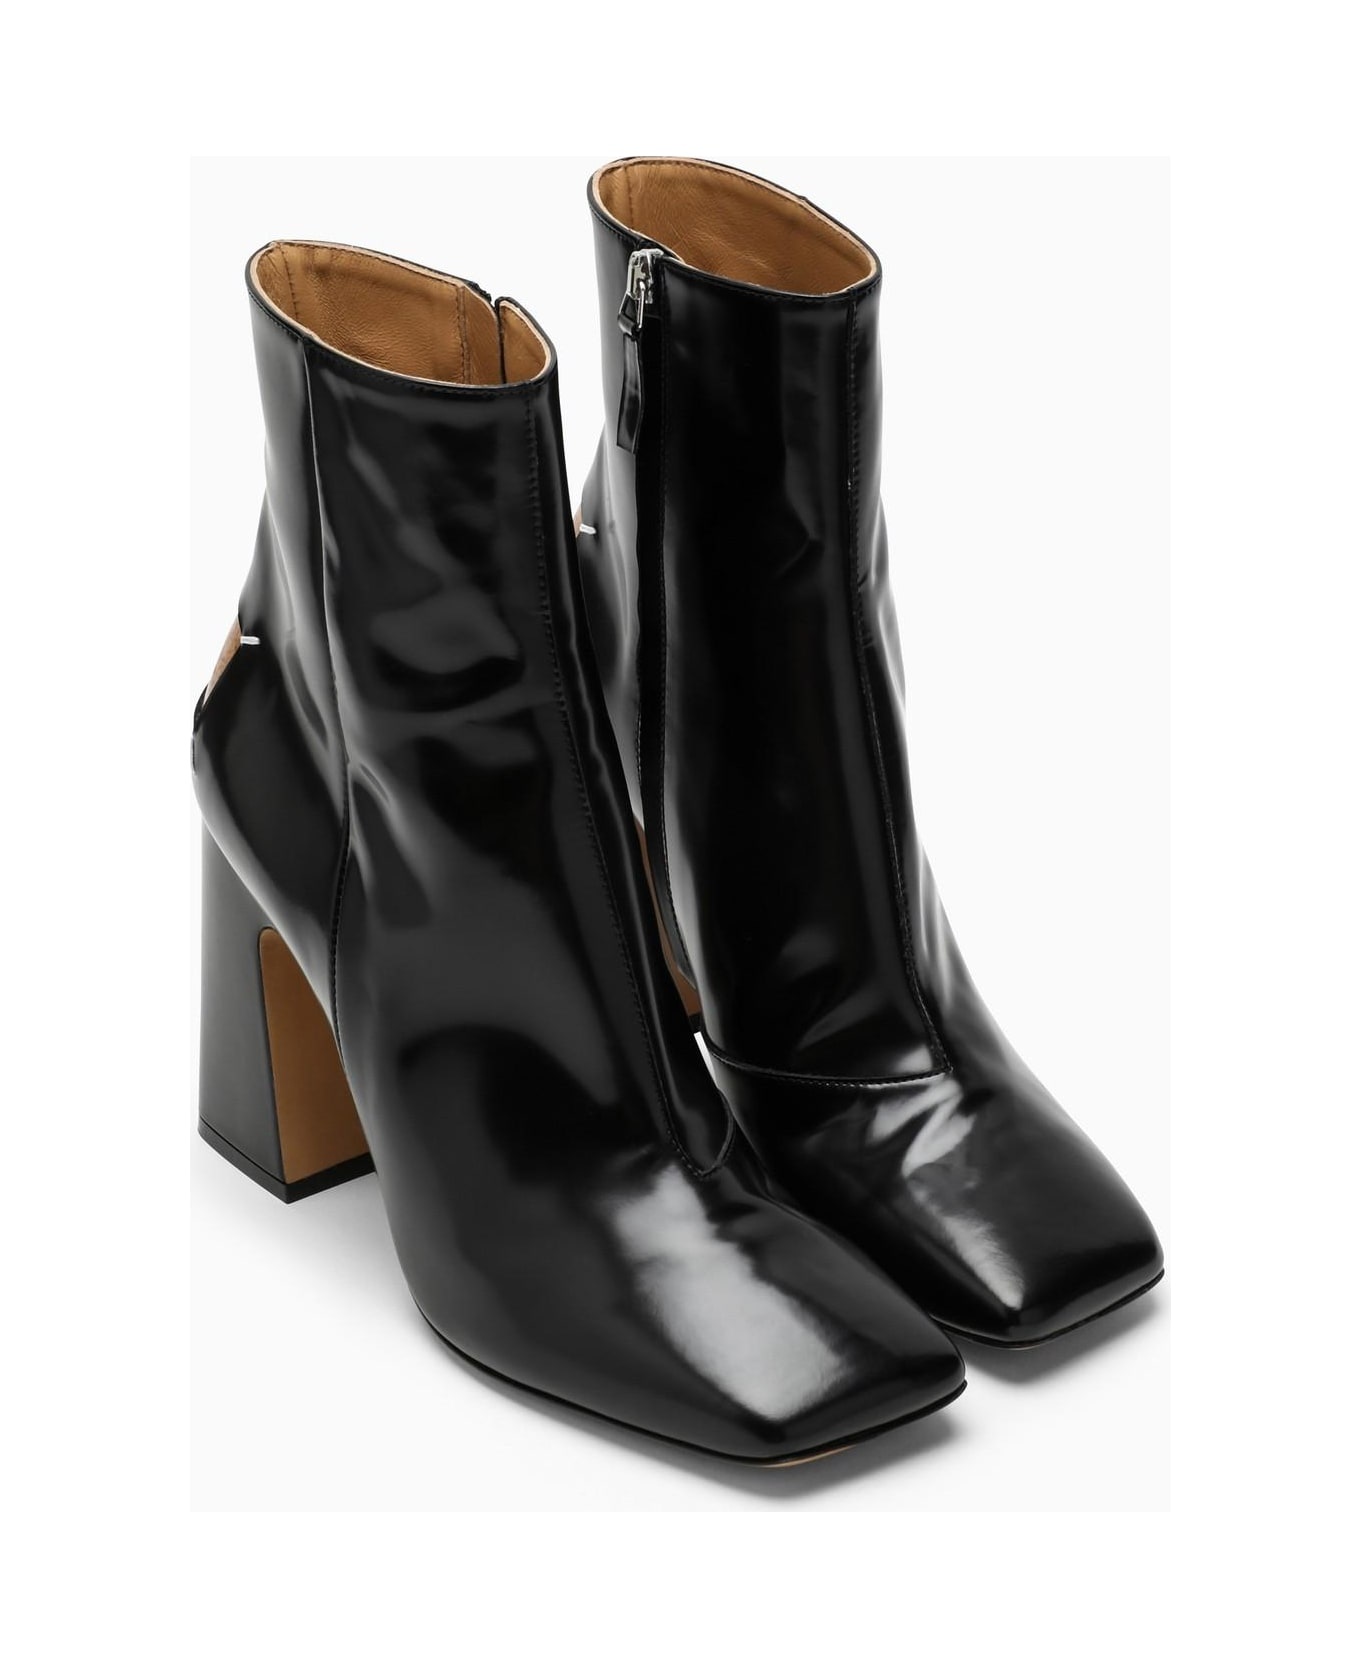 Black Shiny Leather Ankle Boots - 2